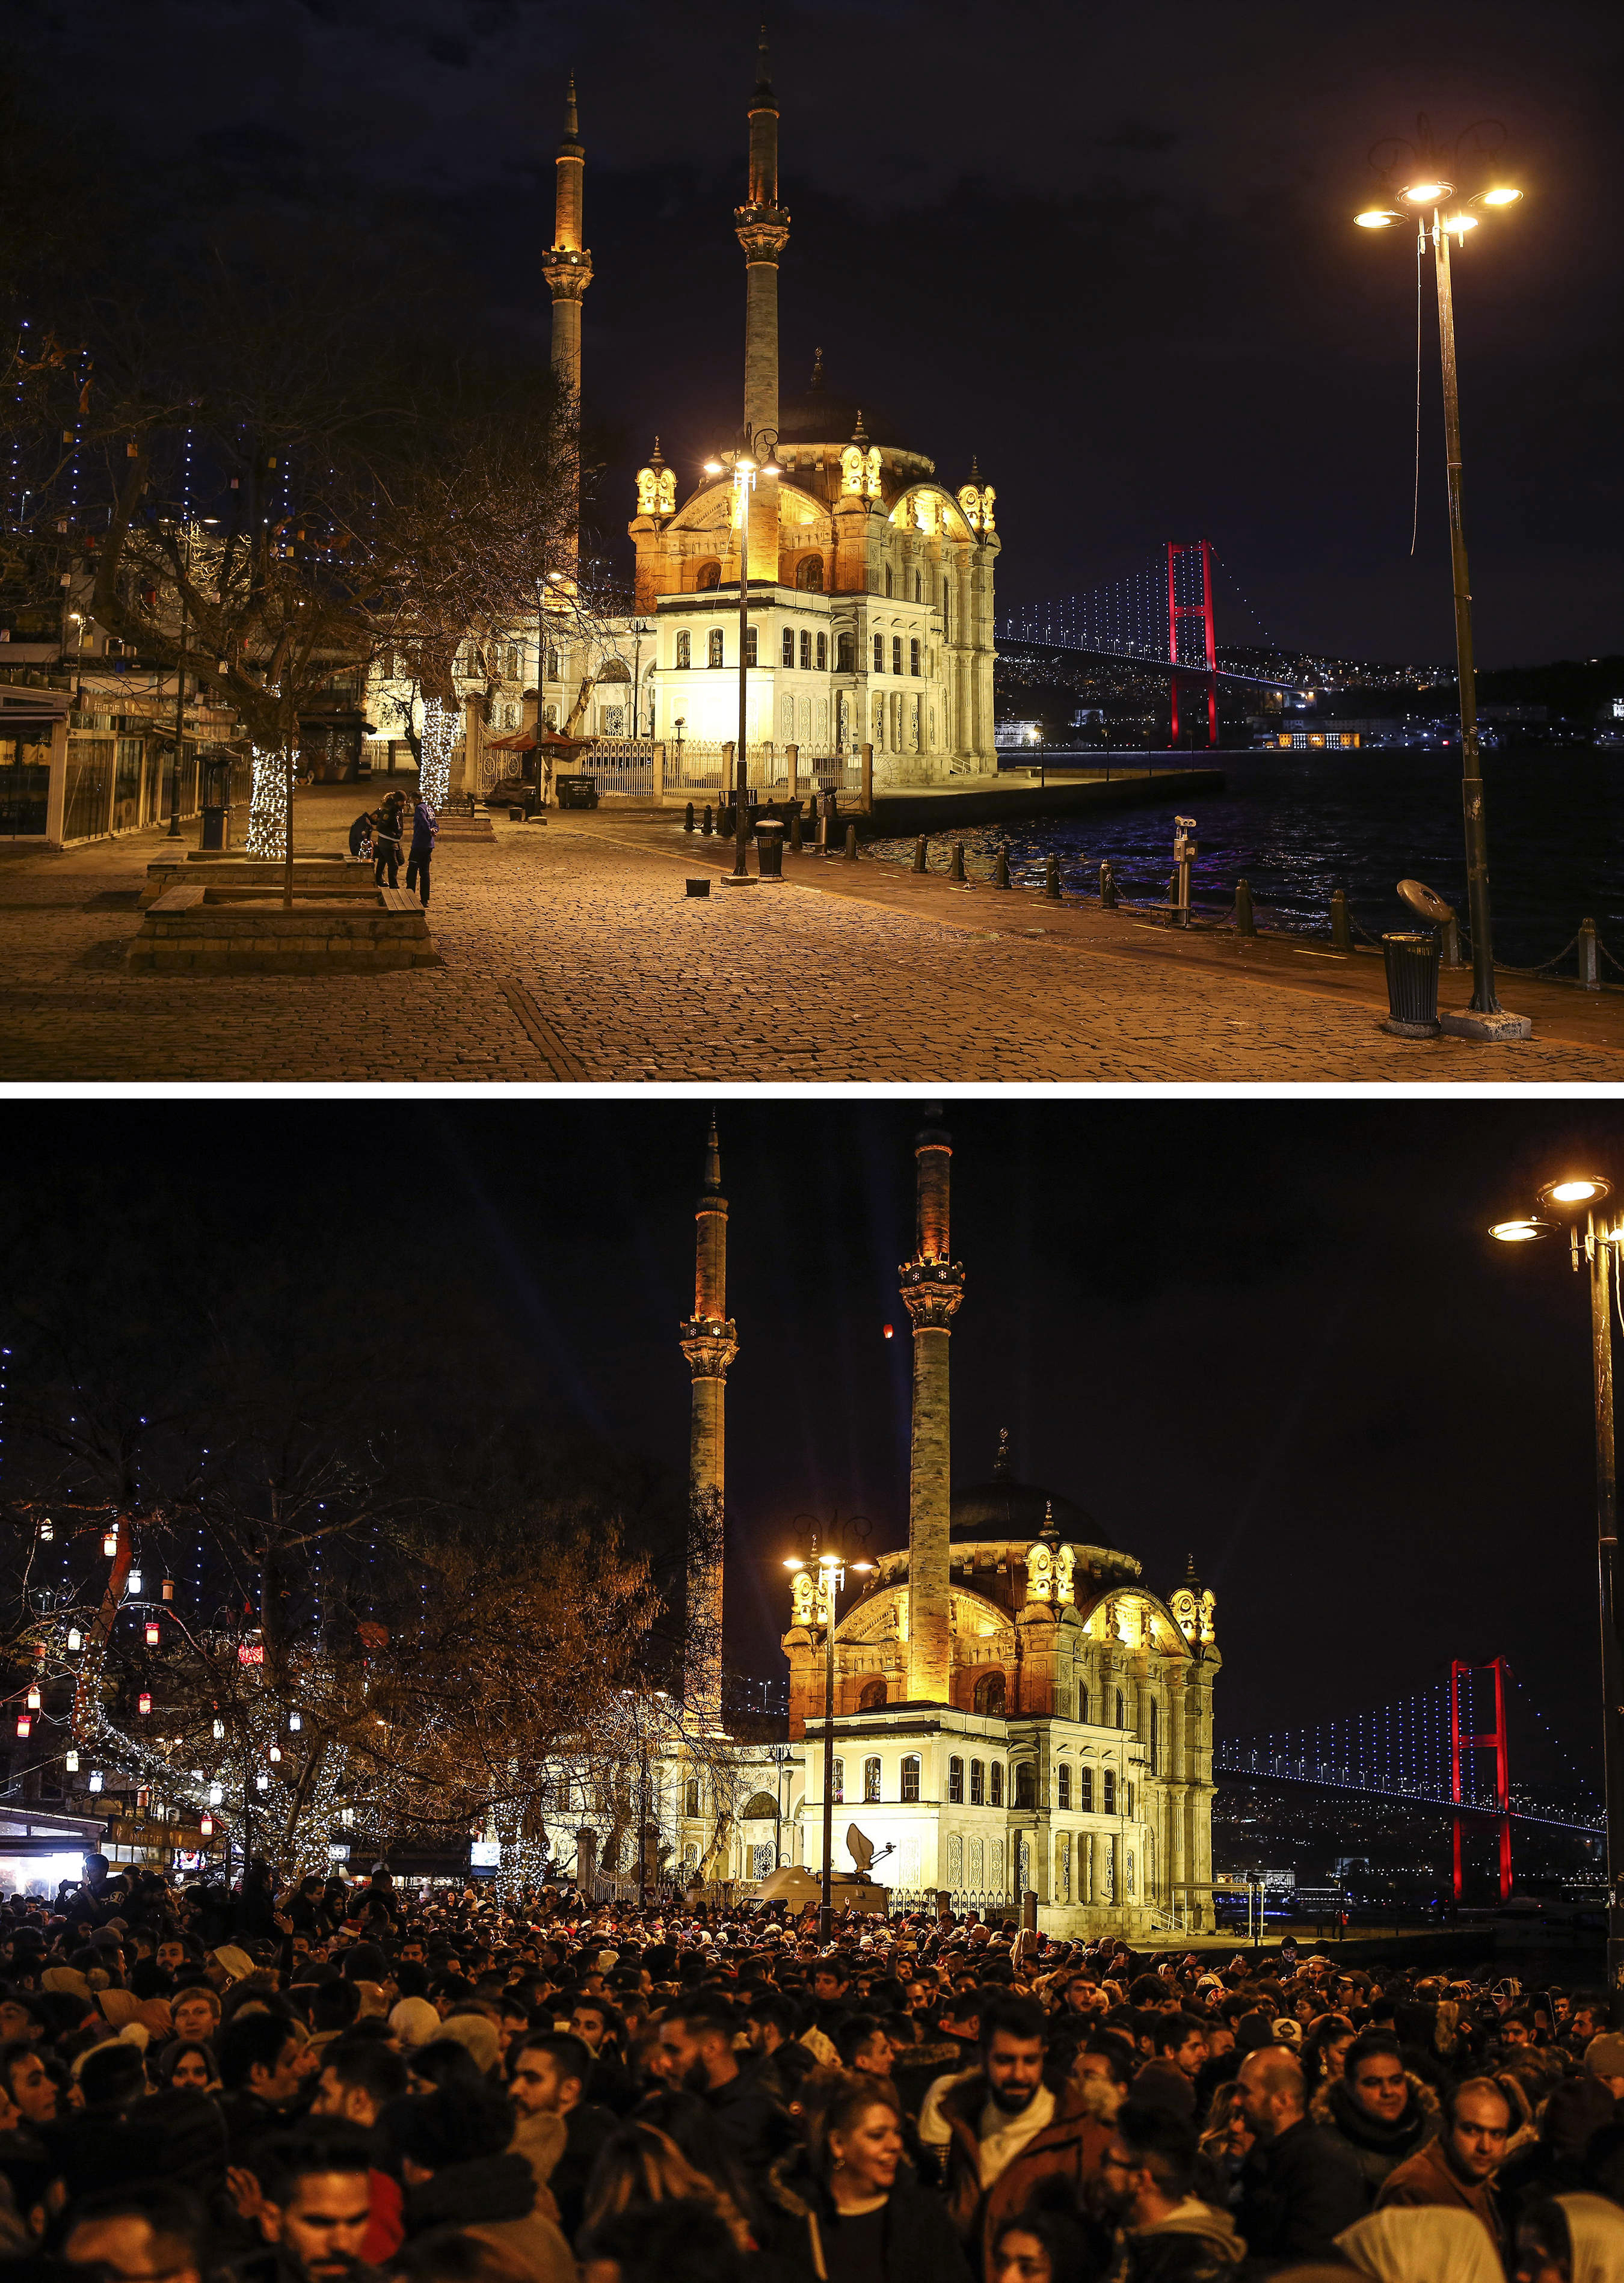 The plaza in front of the Ottoman-era Mecidiye mosque in Ortakoy Square in Istanbul on December 31 2020, top, and on January 1 2020